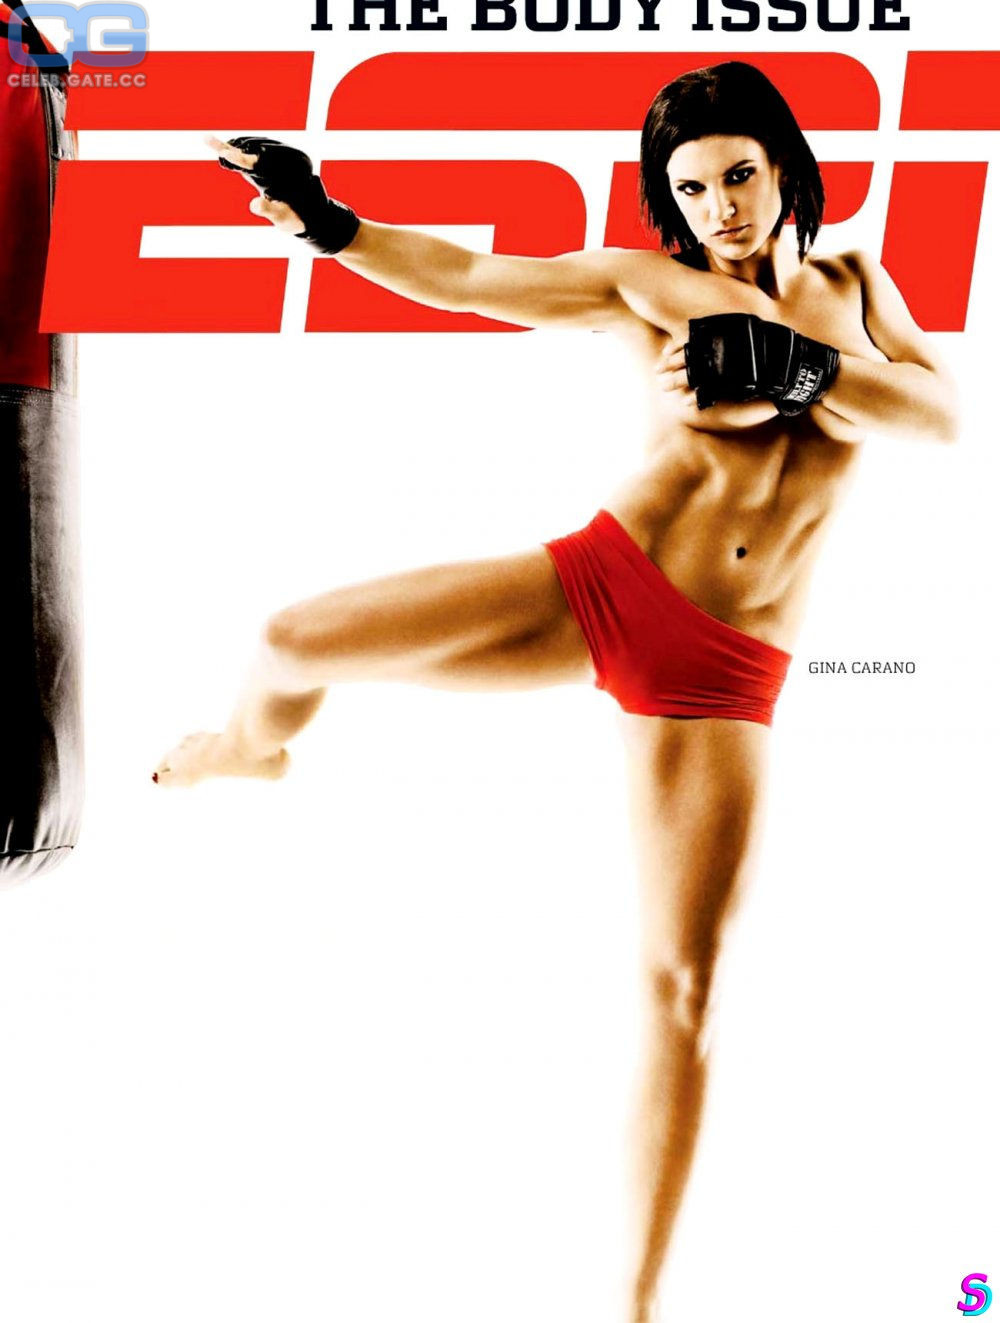 Gina Carano nude, pictures, photos, Playboy, naked, topless, fappening